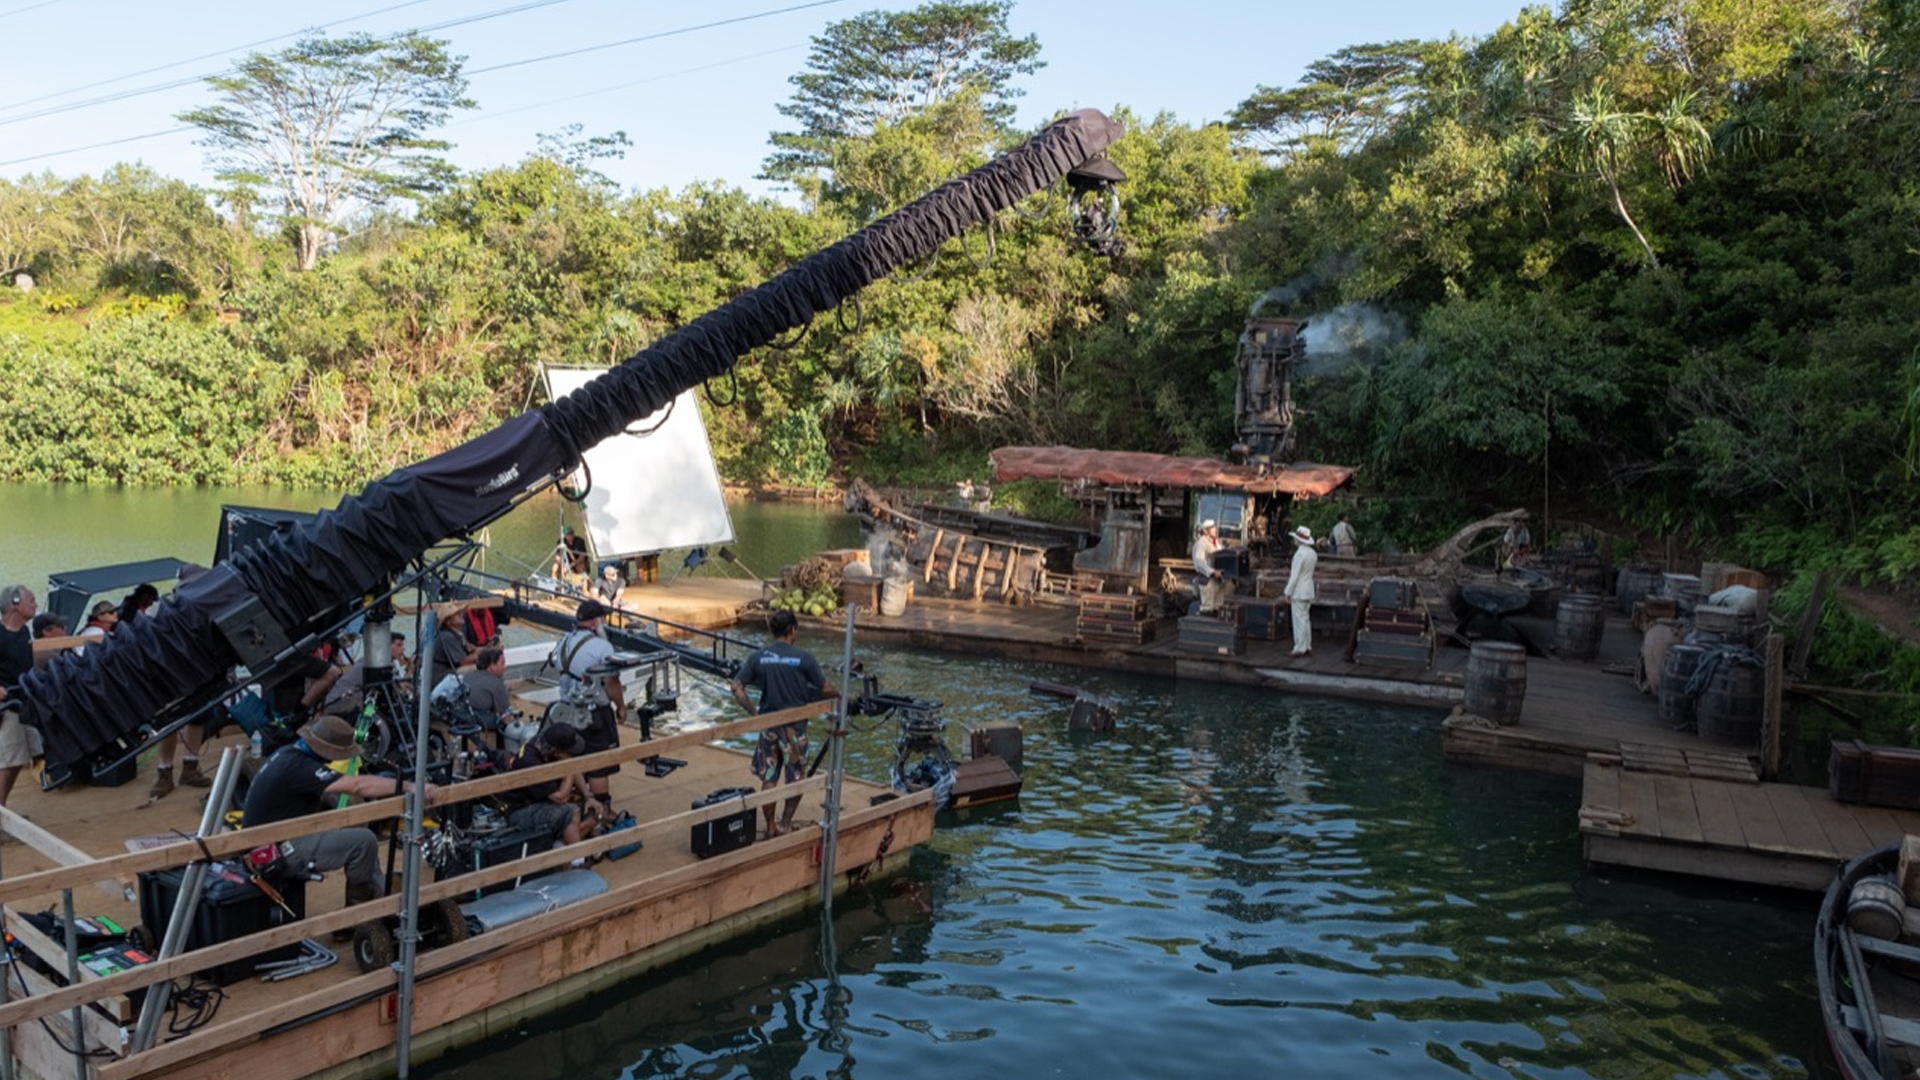 Paying homage to the iconic ride is what Disney’s upcoming movie, Jungle Cruise is all about